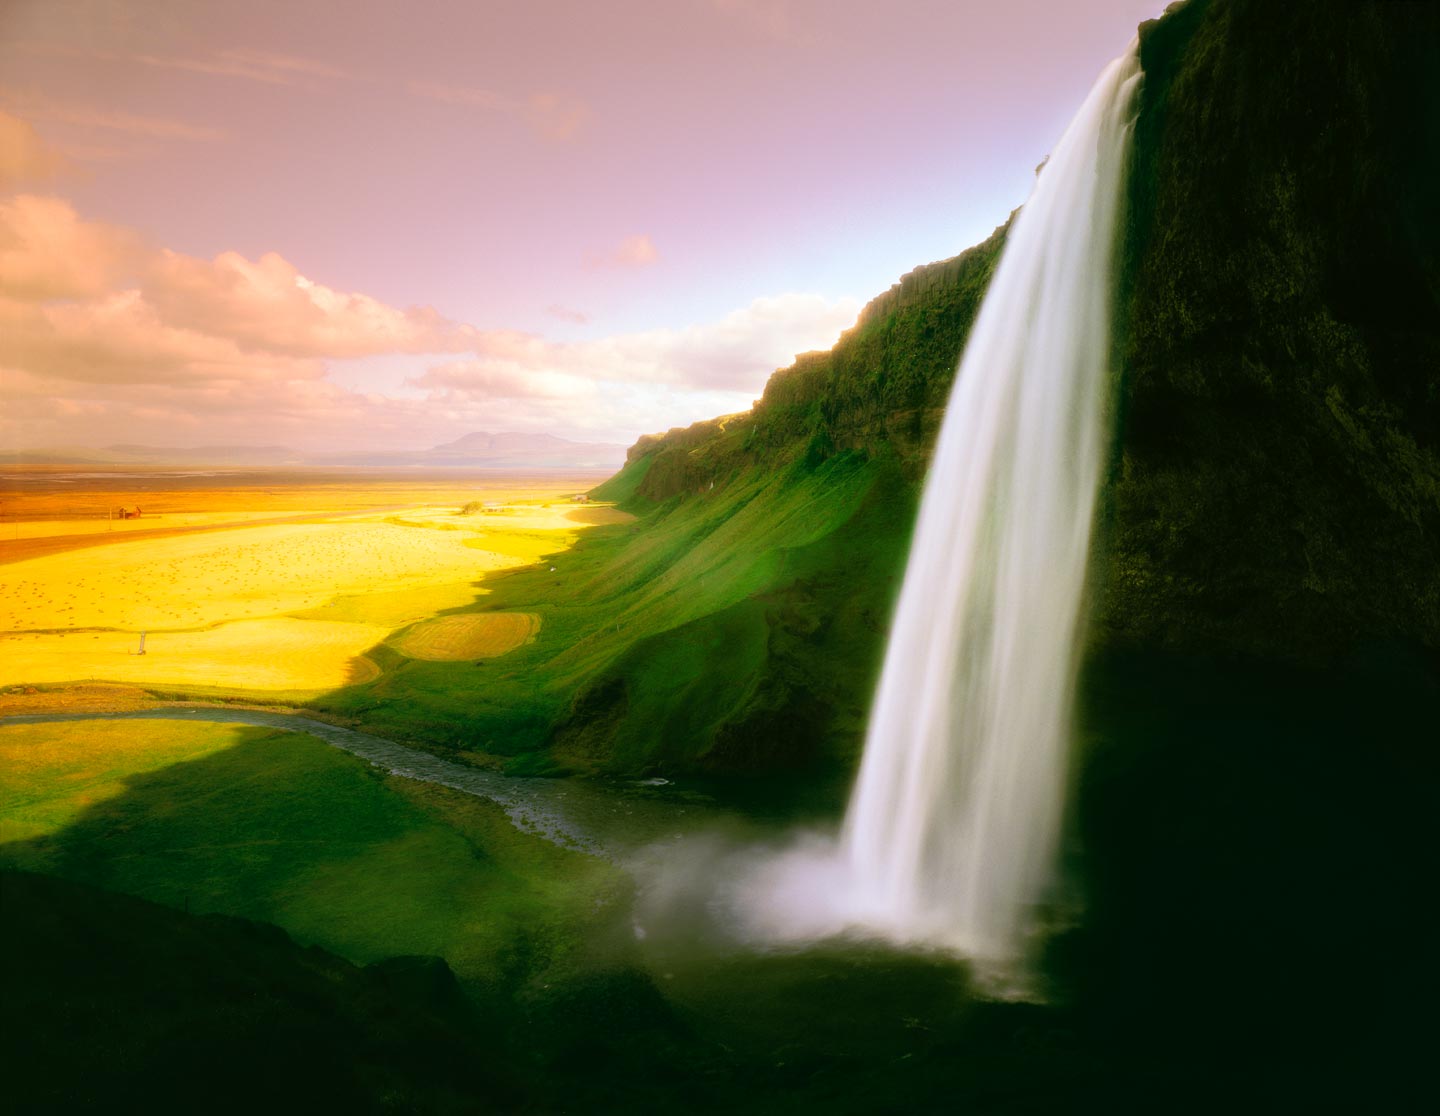 Icelandic landscape by photographer Ron Bambridge. This is the Seljalandsfoss waterfall on the south side of the island